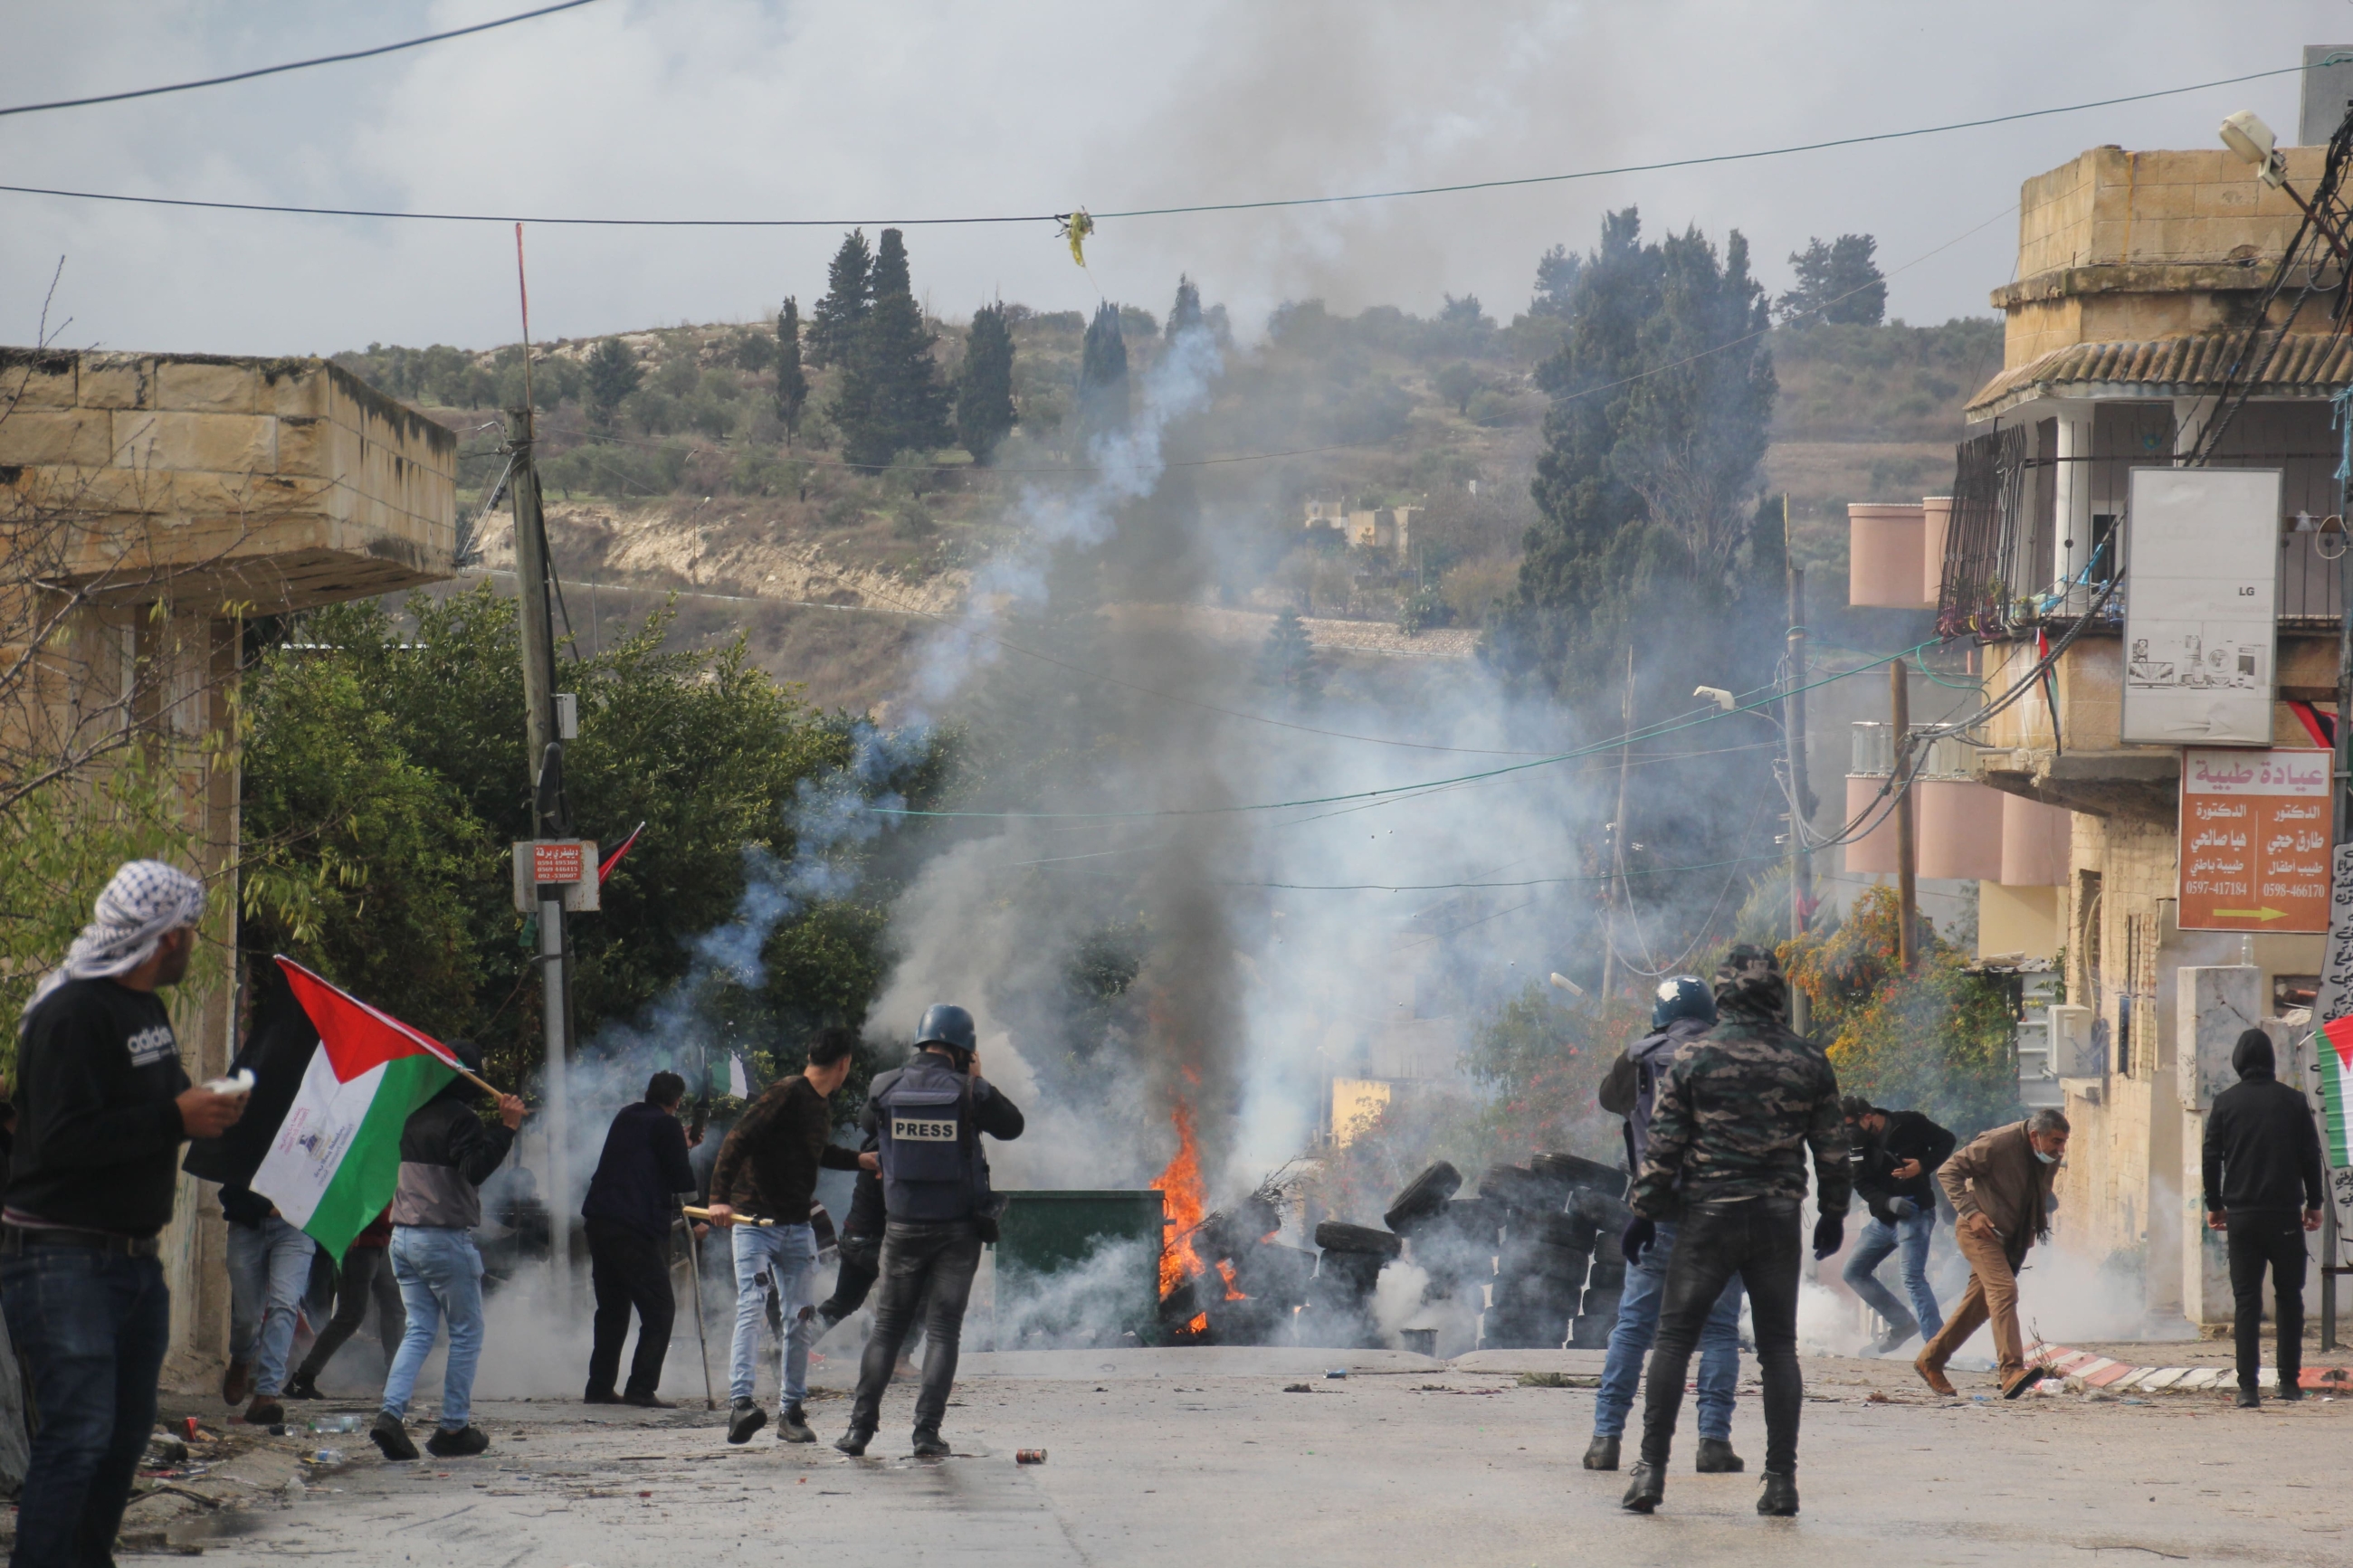 Palestinian protesters and journalists attacked by tear gas in Burqa, Nablus